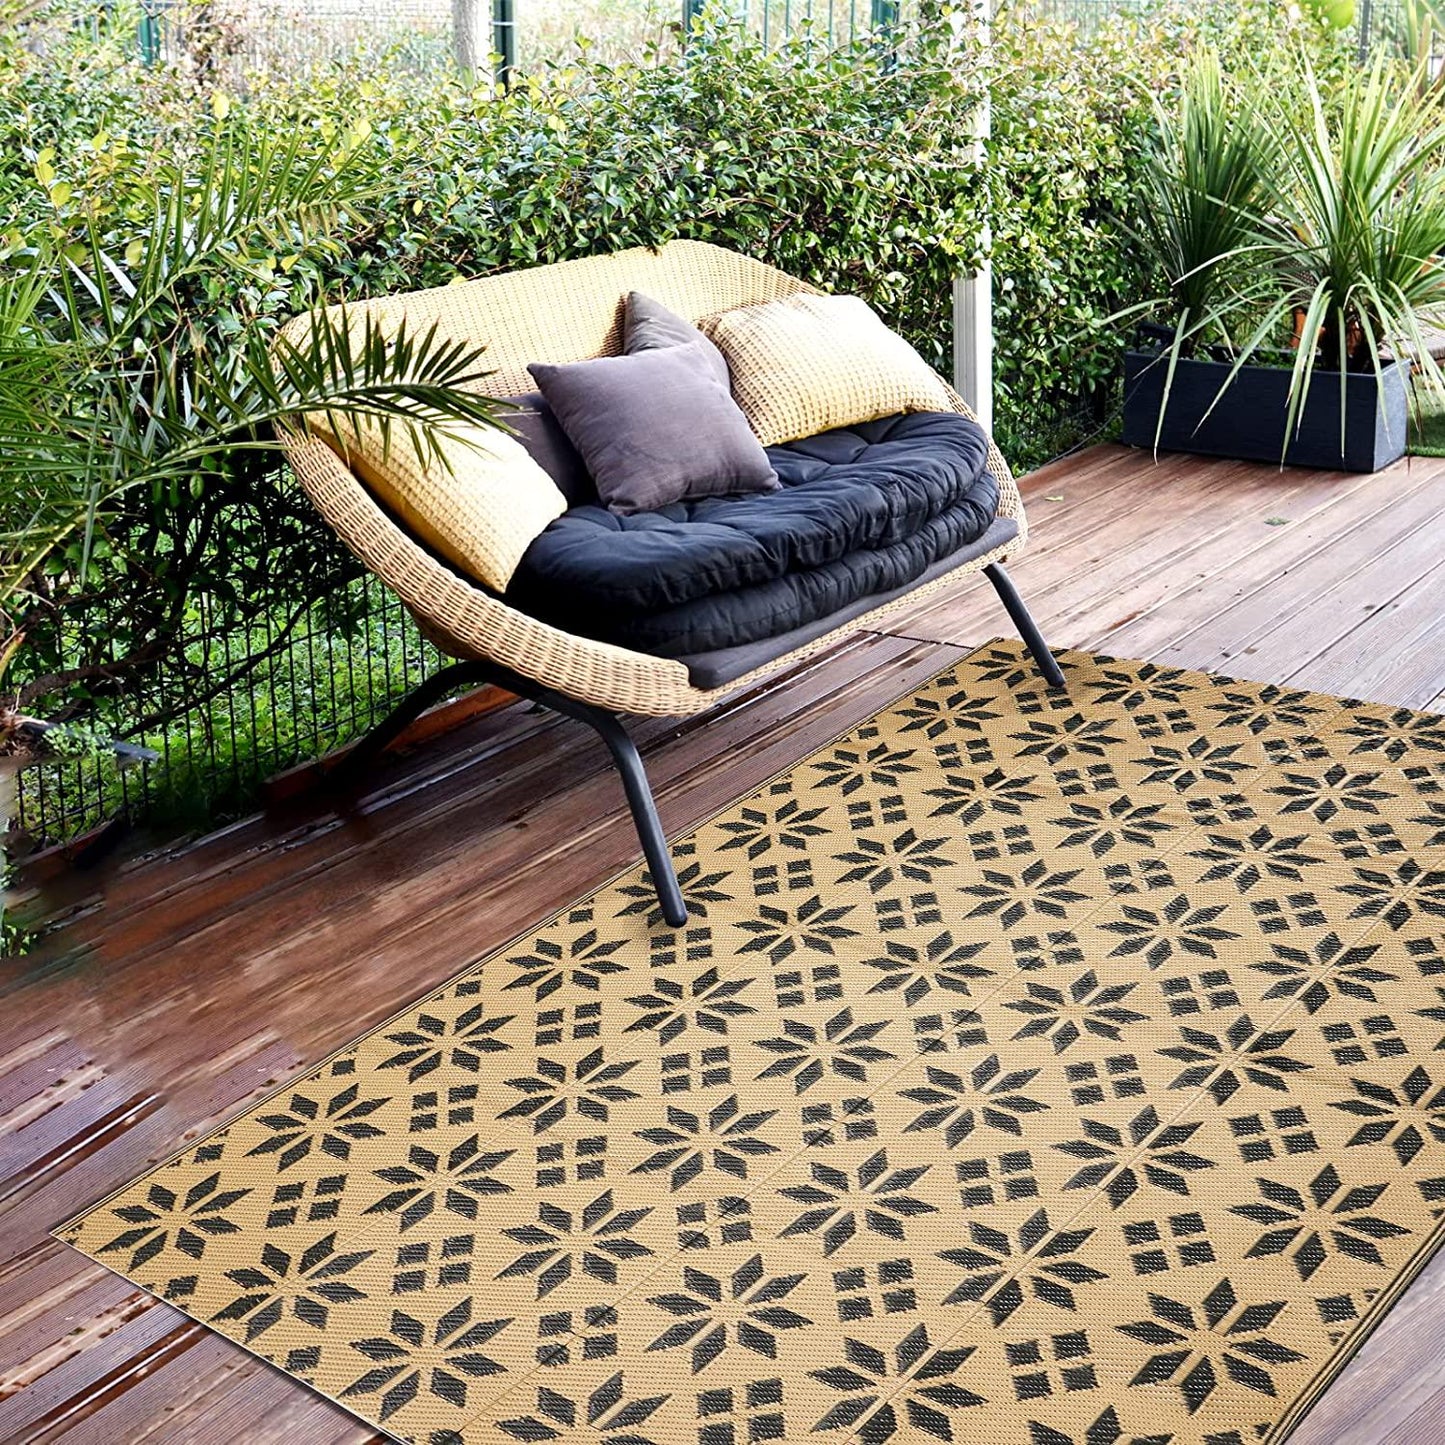 Reversible Rugs Plastic Rug Outdoor Rug Lightweight Outside Mats with Carrying Bag Modern Outdoor Rug for Patio Portable Mats for RV Backyard Deck Picnic Beach(5x7,Yellow Flower)